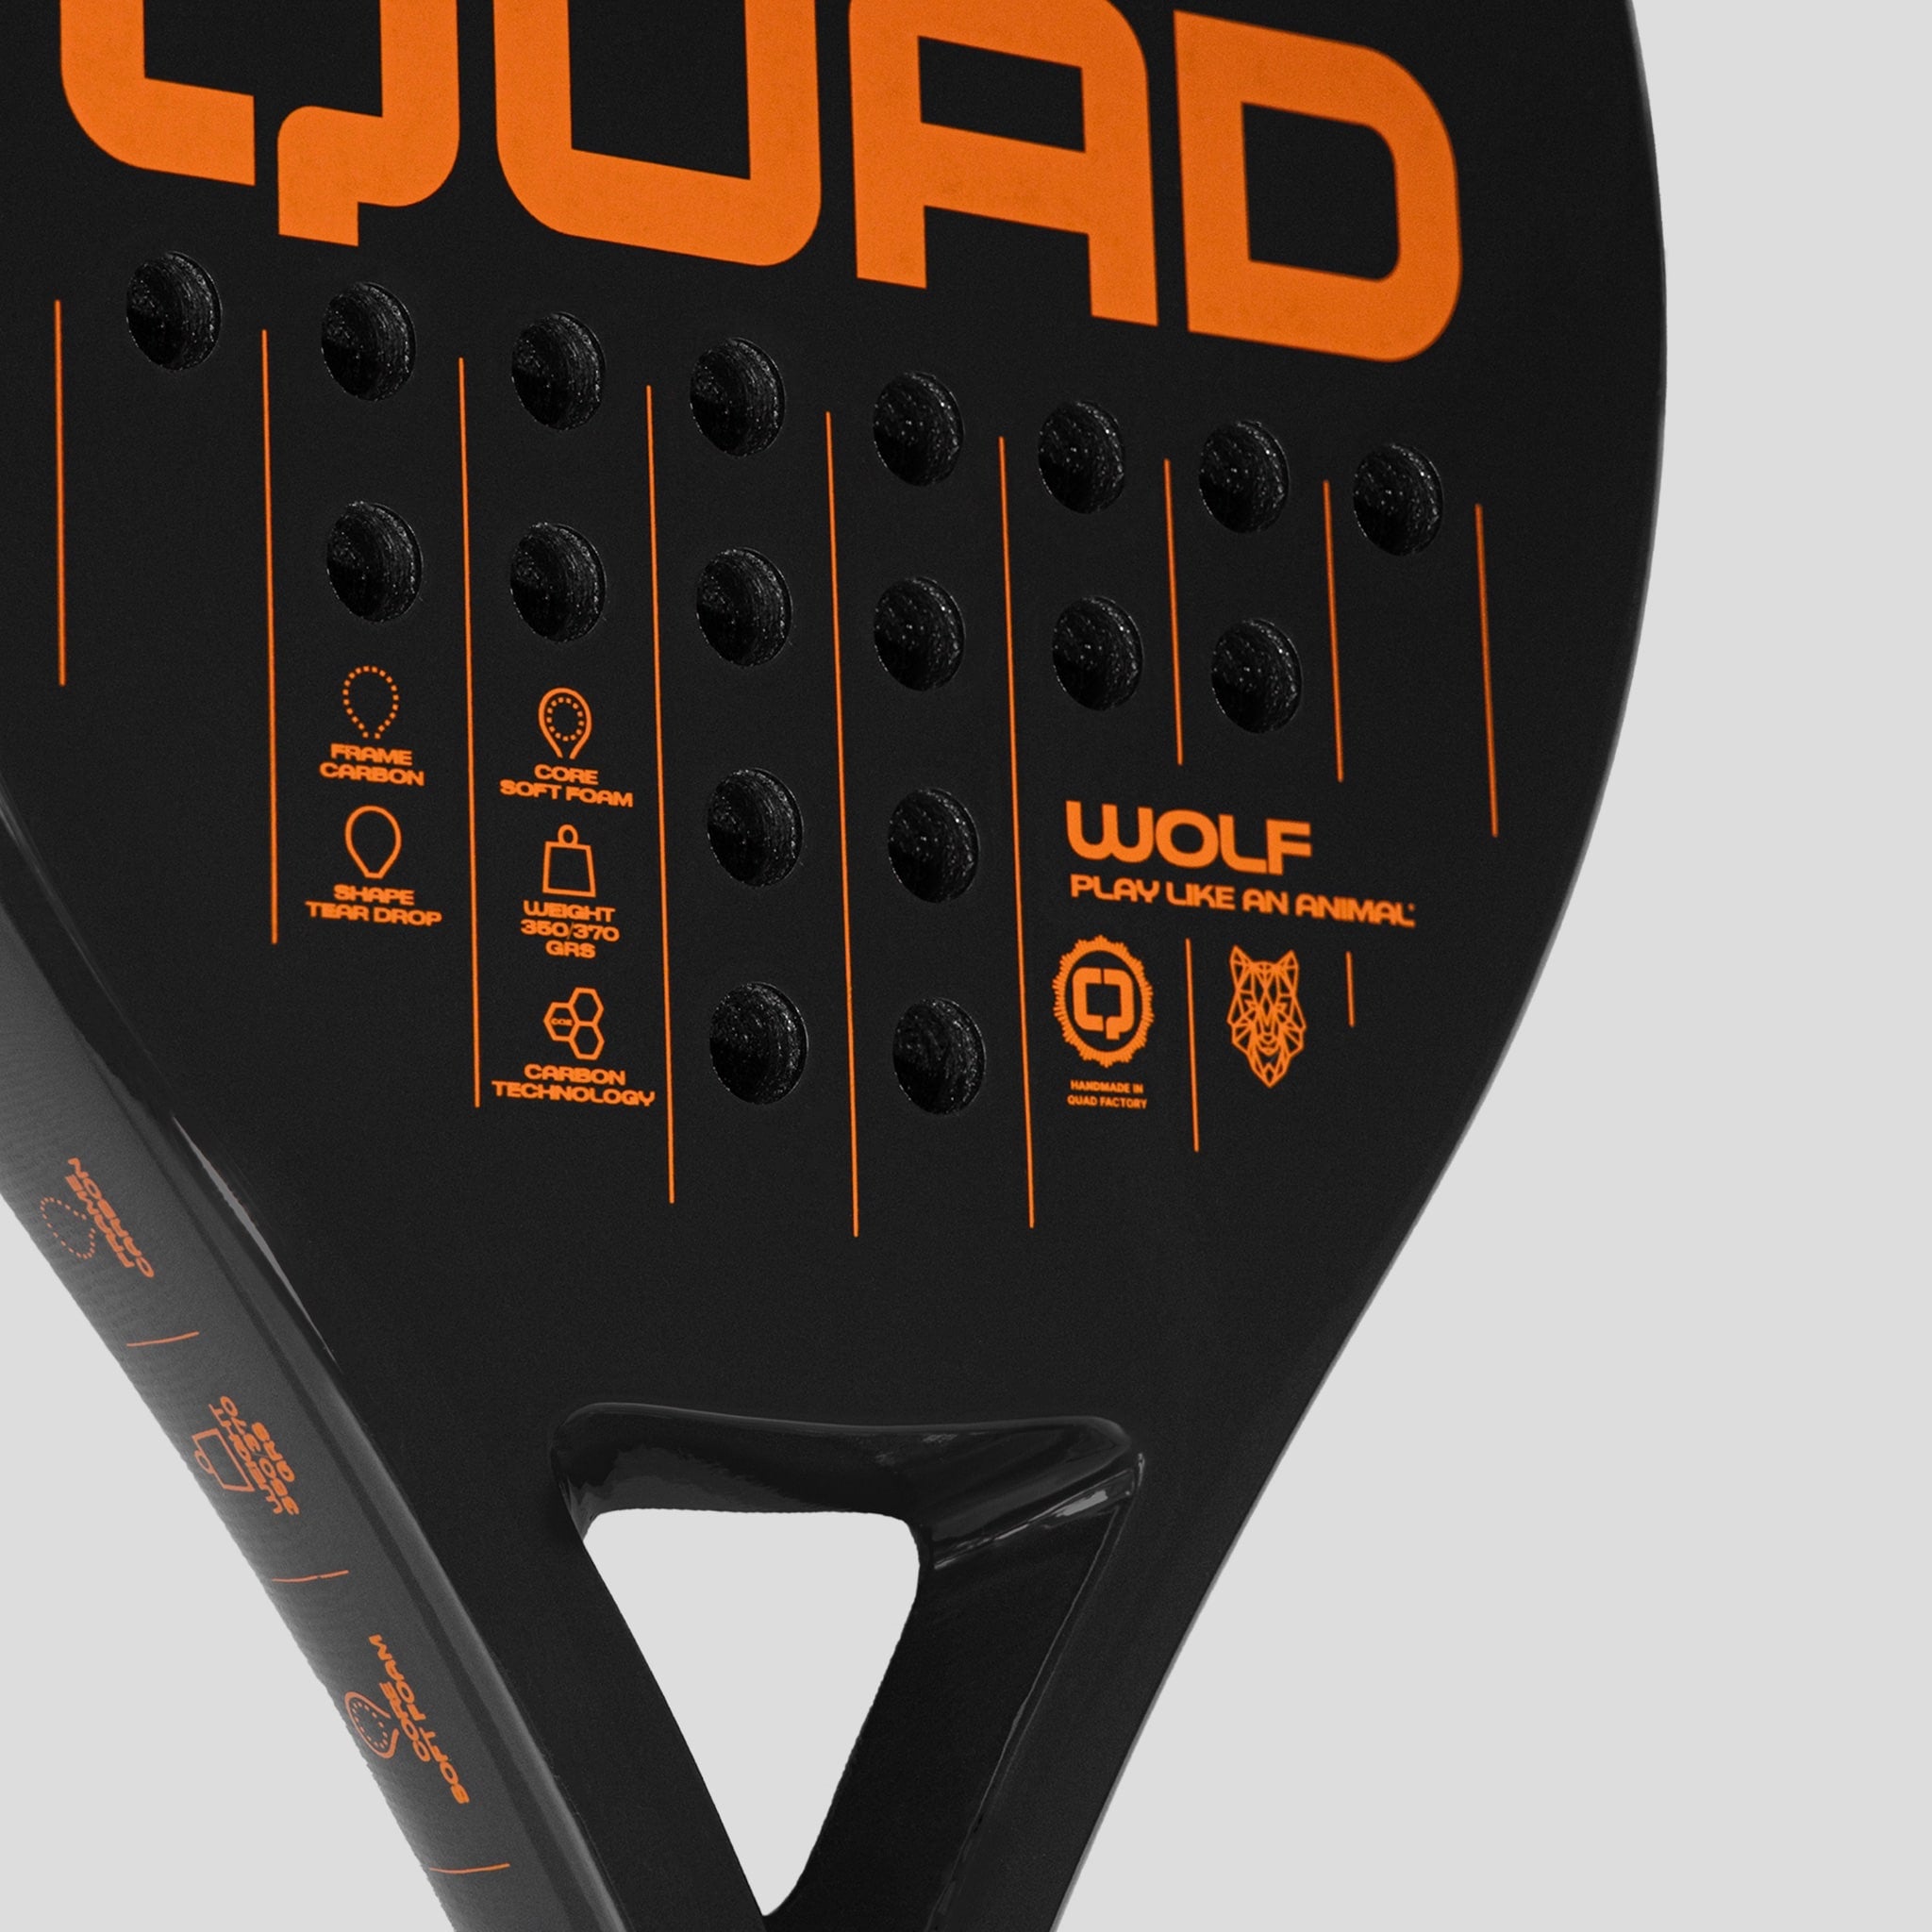 Quad Padel Wolf Racket detail front